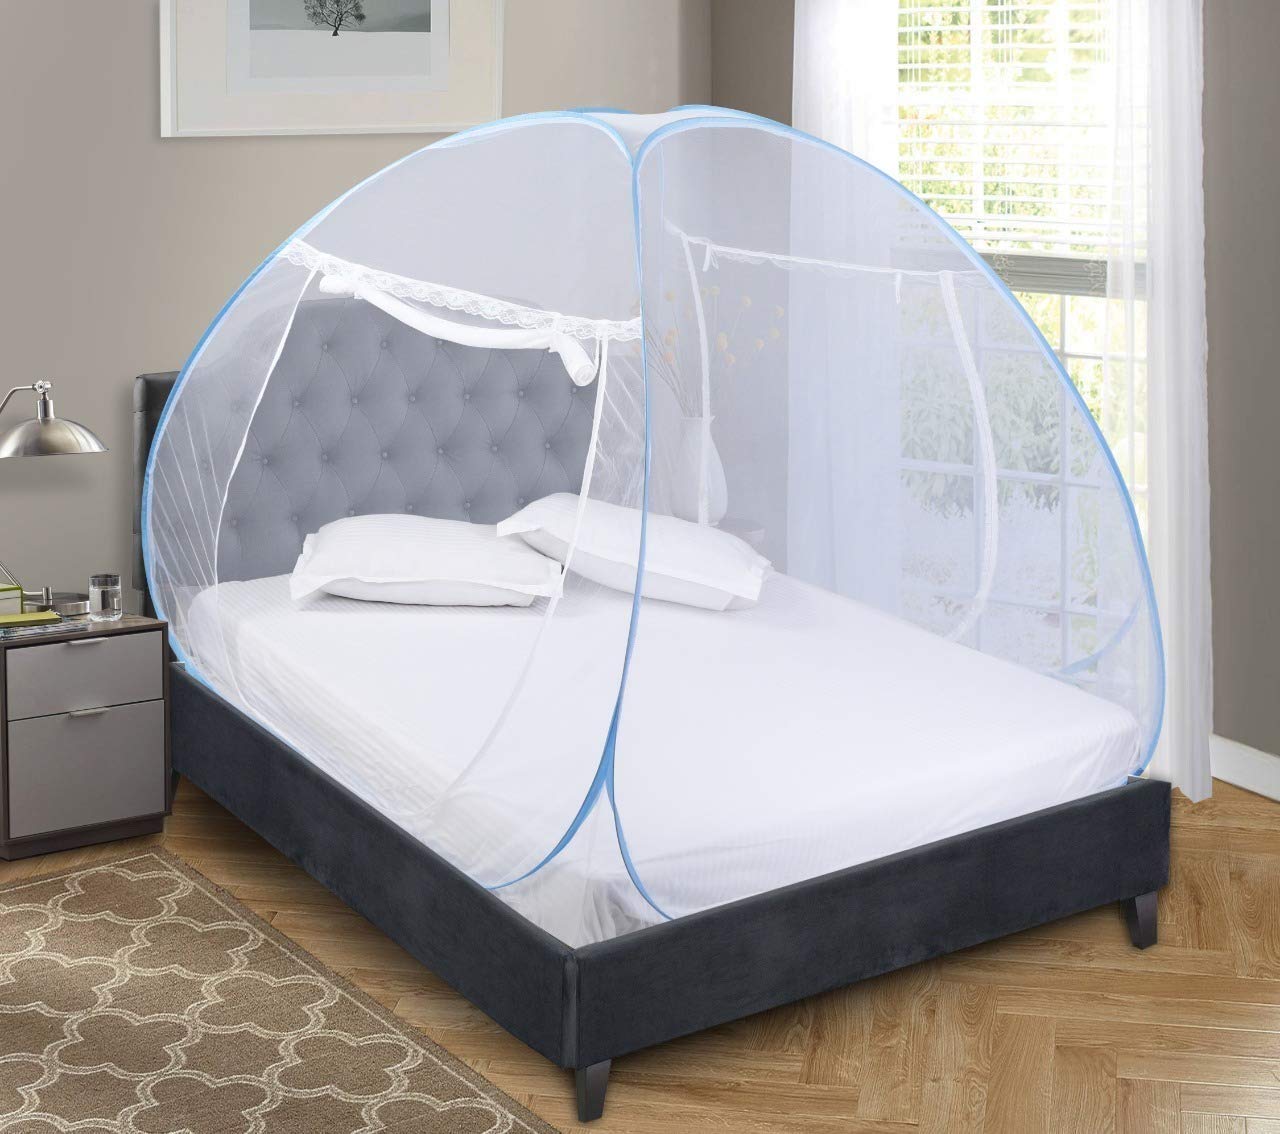 IMPOWER Mosquito Net Foldable